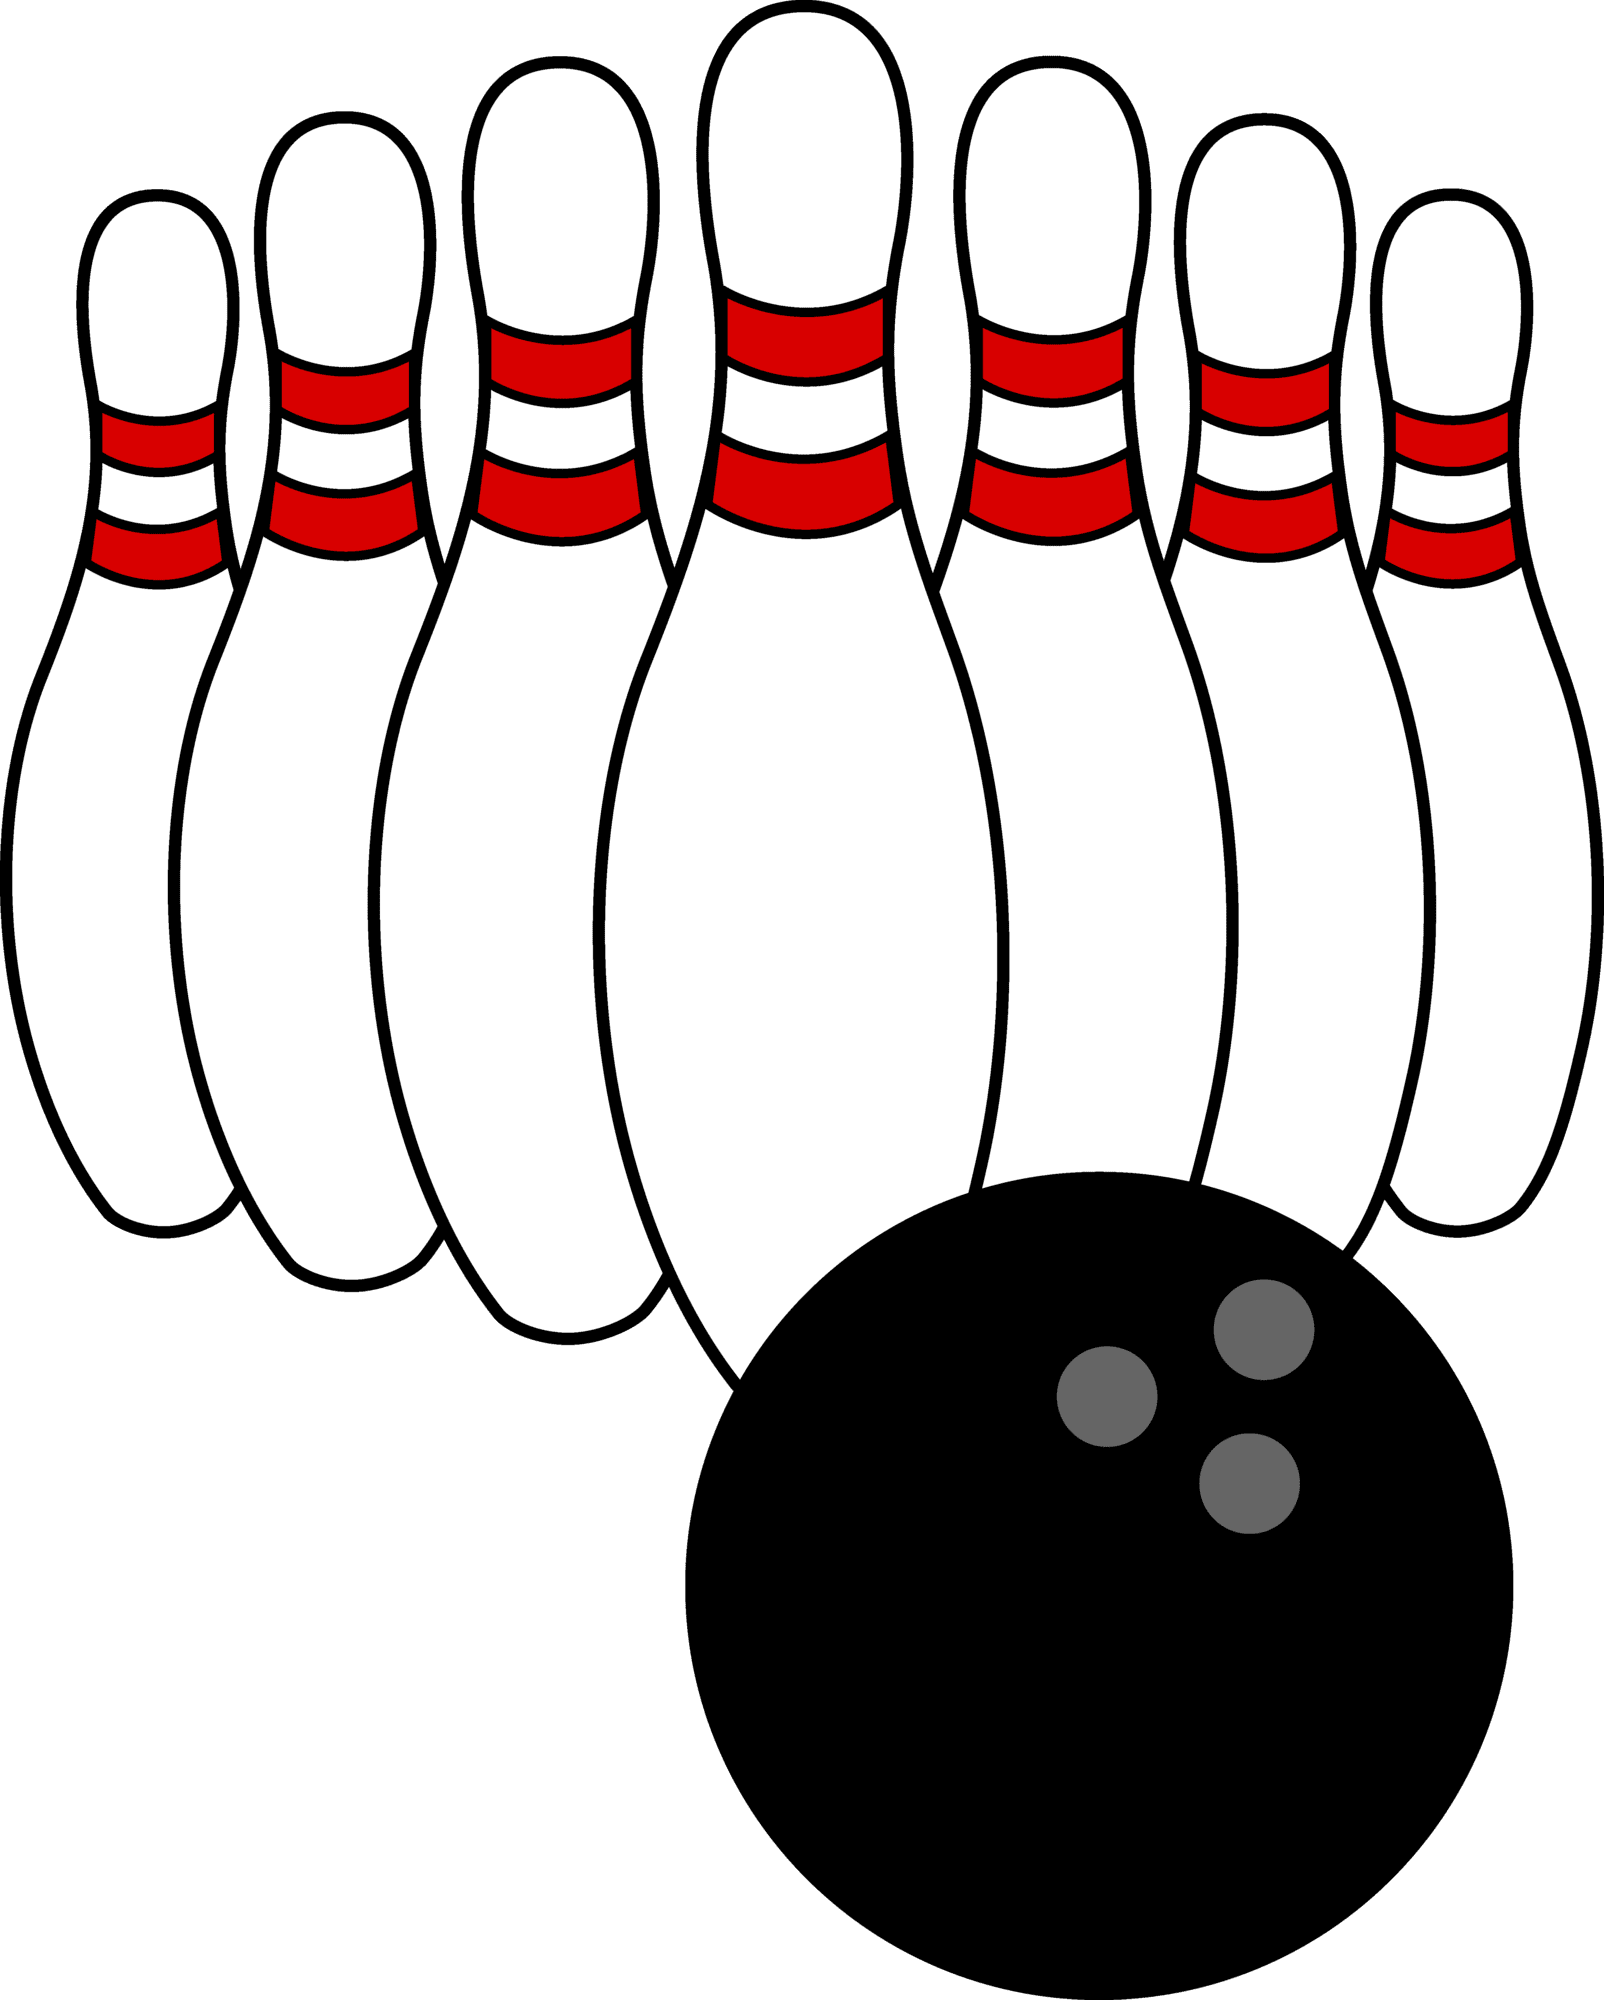 Bowling pin pictures of balls and pins clipart